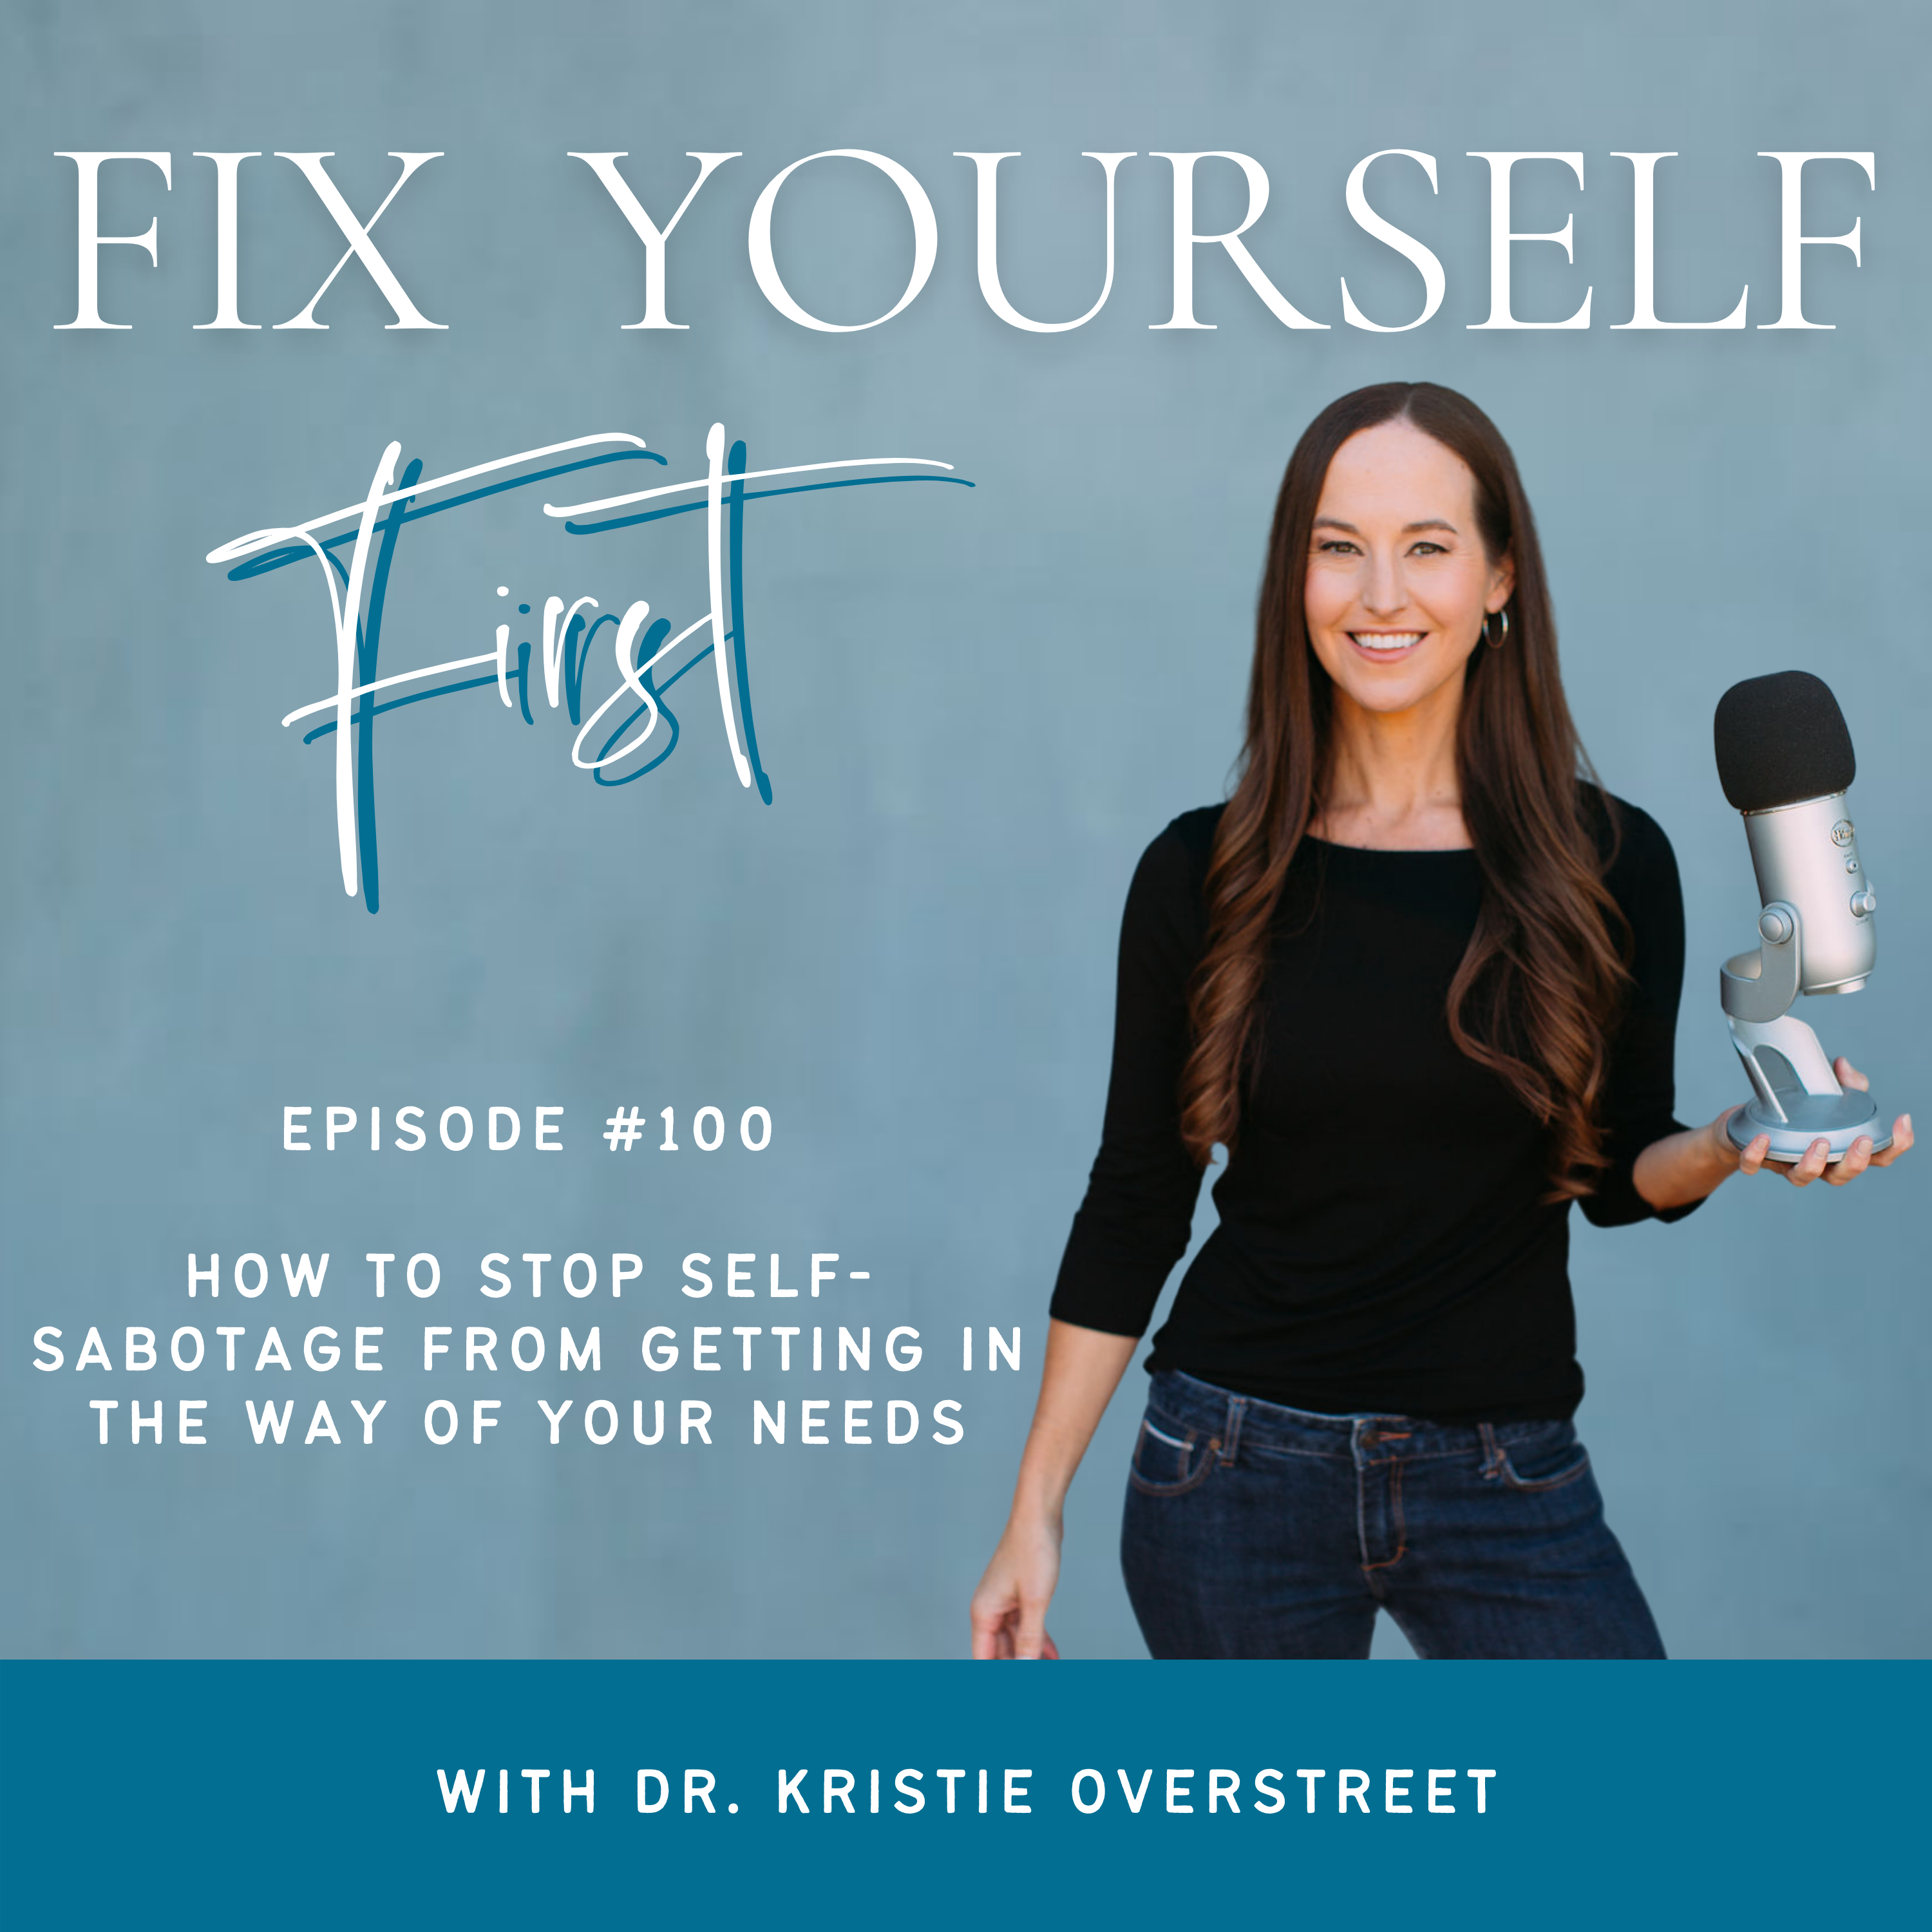 Fix Yourself First Episode 100 How to Stop Self-Sabotage From Getting in the Way of Your Needs